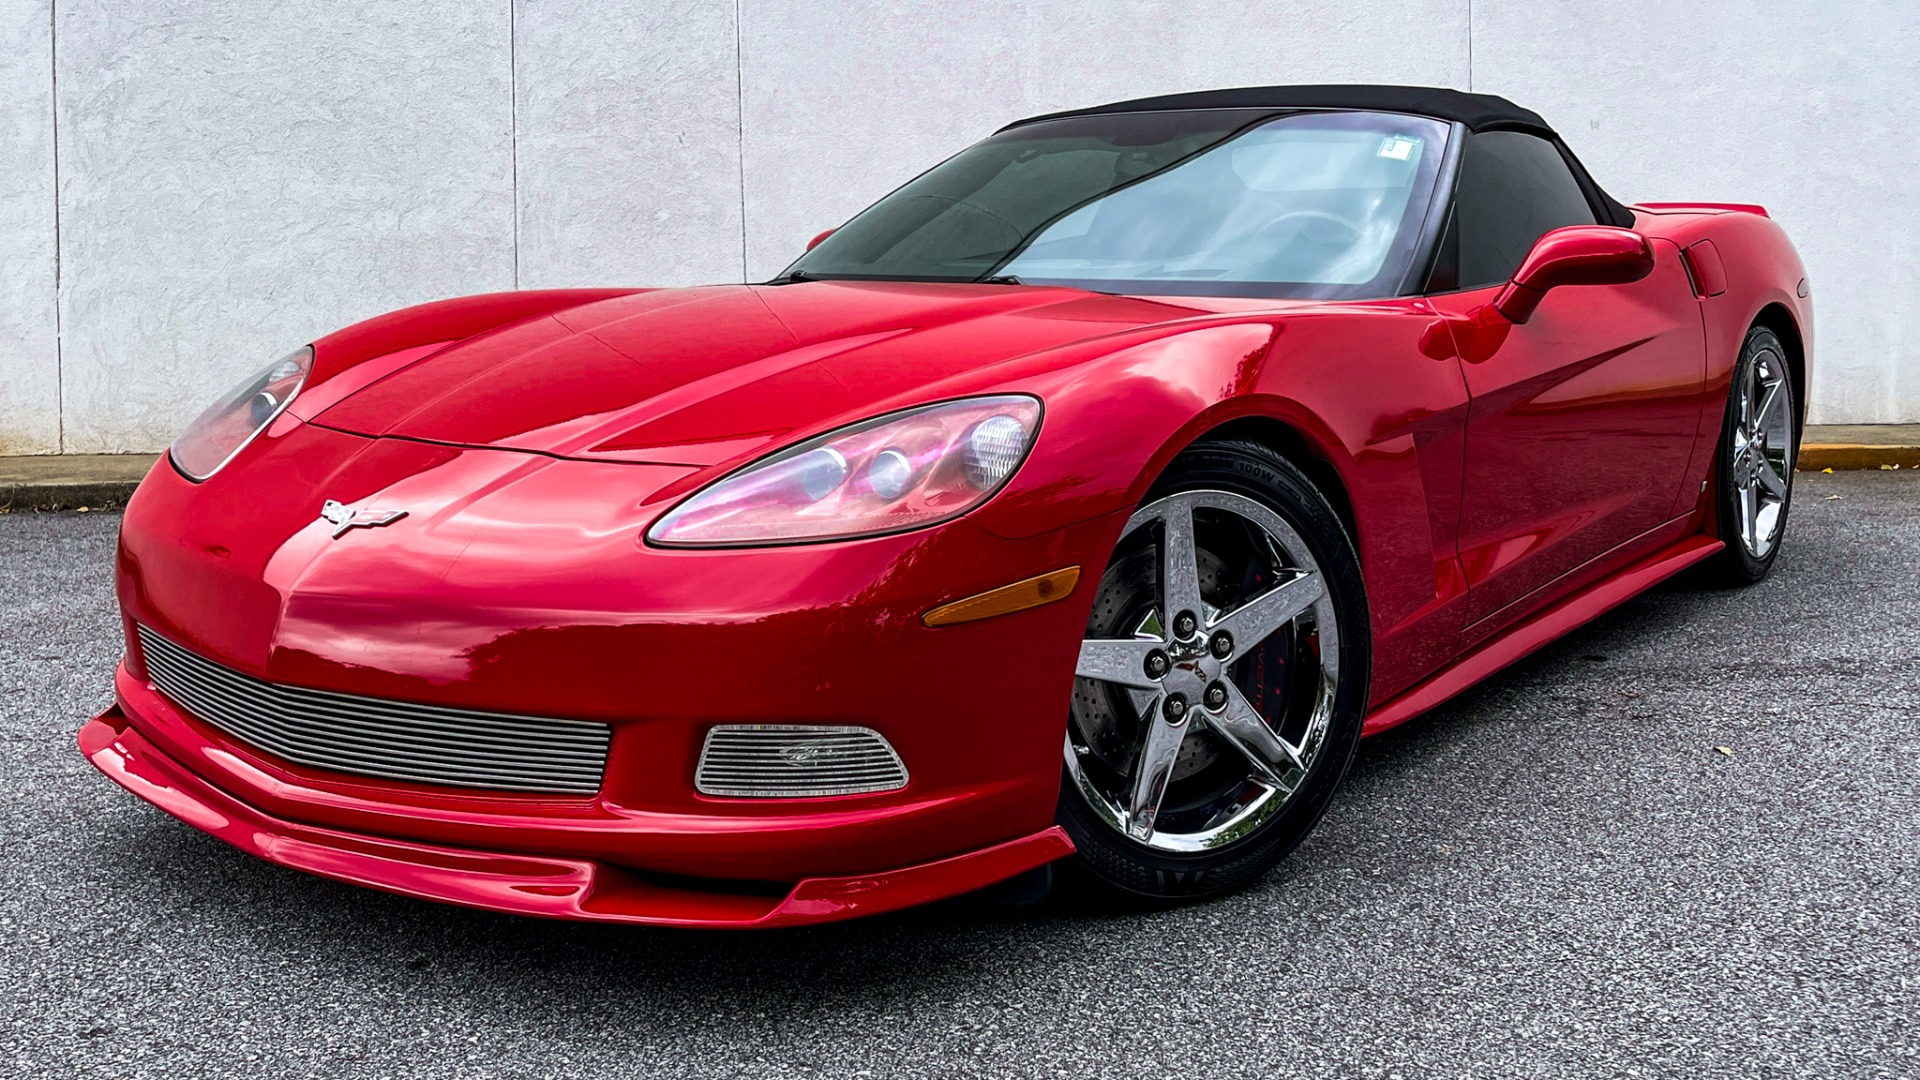 Used 2007 Chevrolet Corvette CONVERTIBLE / CORSA EXHAUST / CHROME WHEELS / LEATHER / AUTOMATIC for sale Sold at Formula Imports in Charlotte NC 28227 1